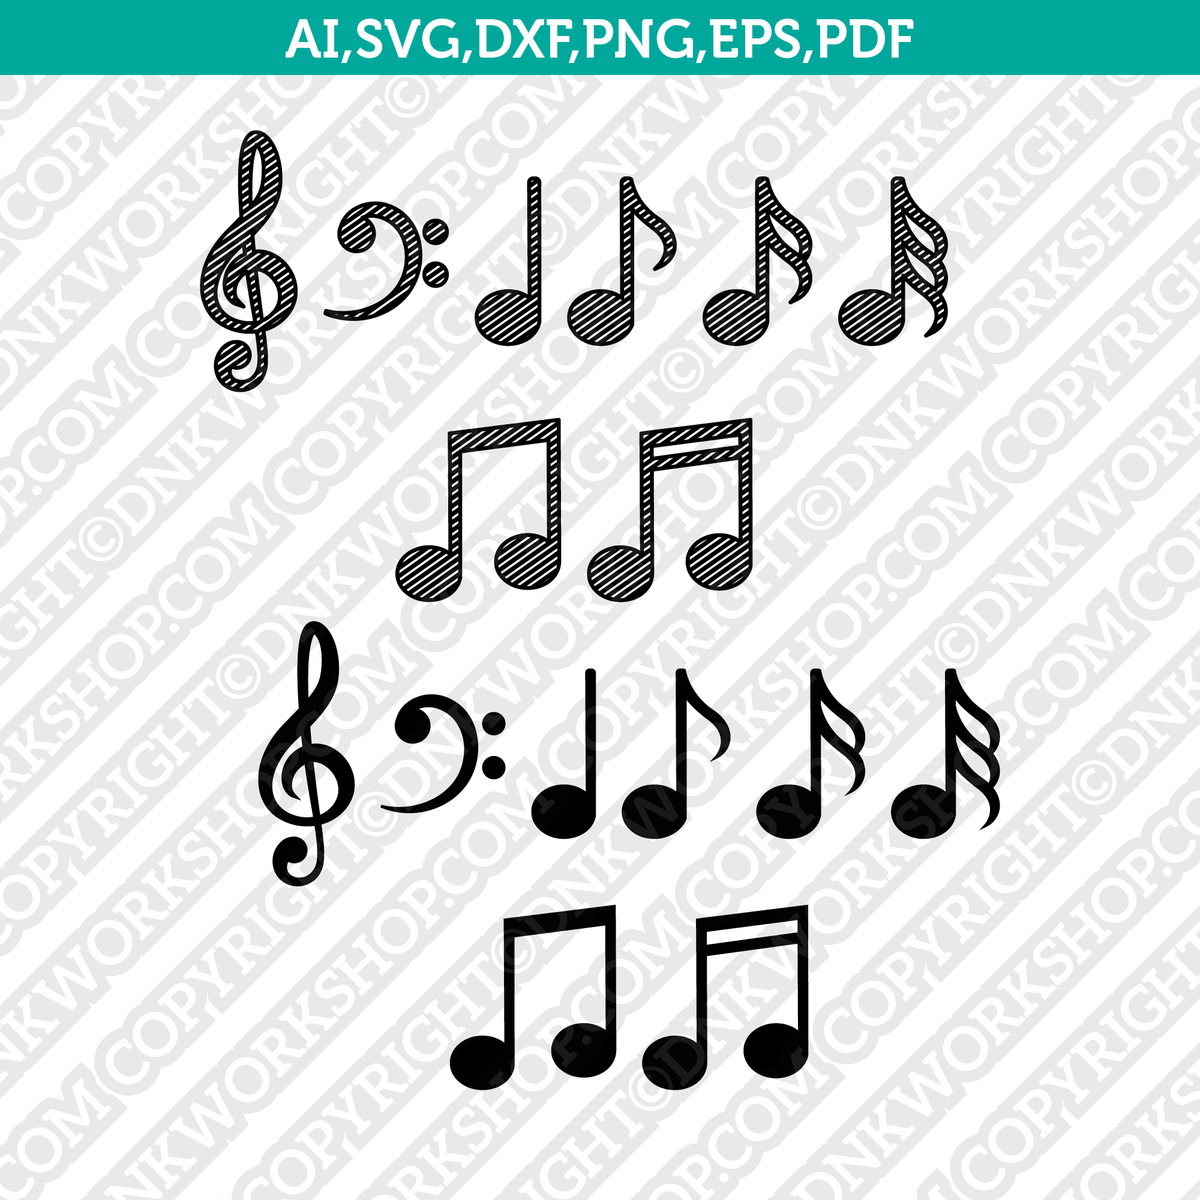 music note vector png